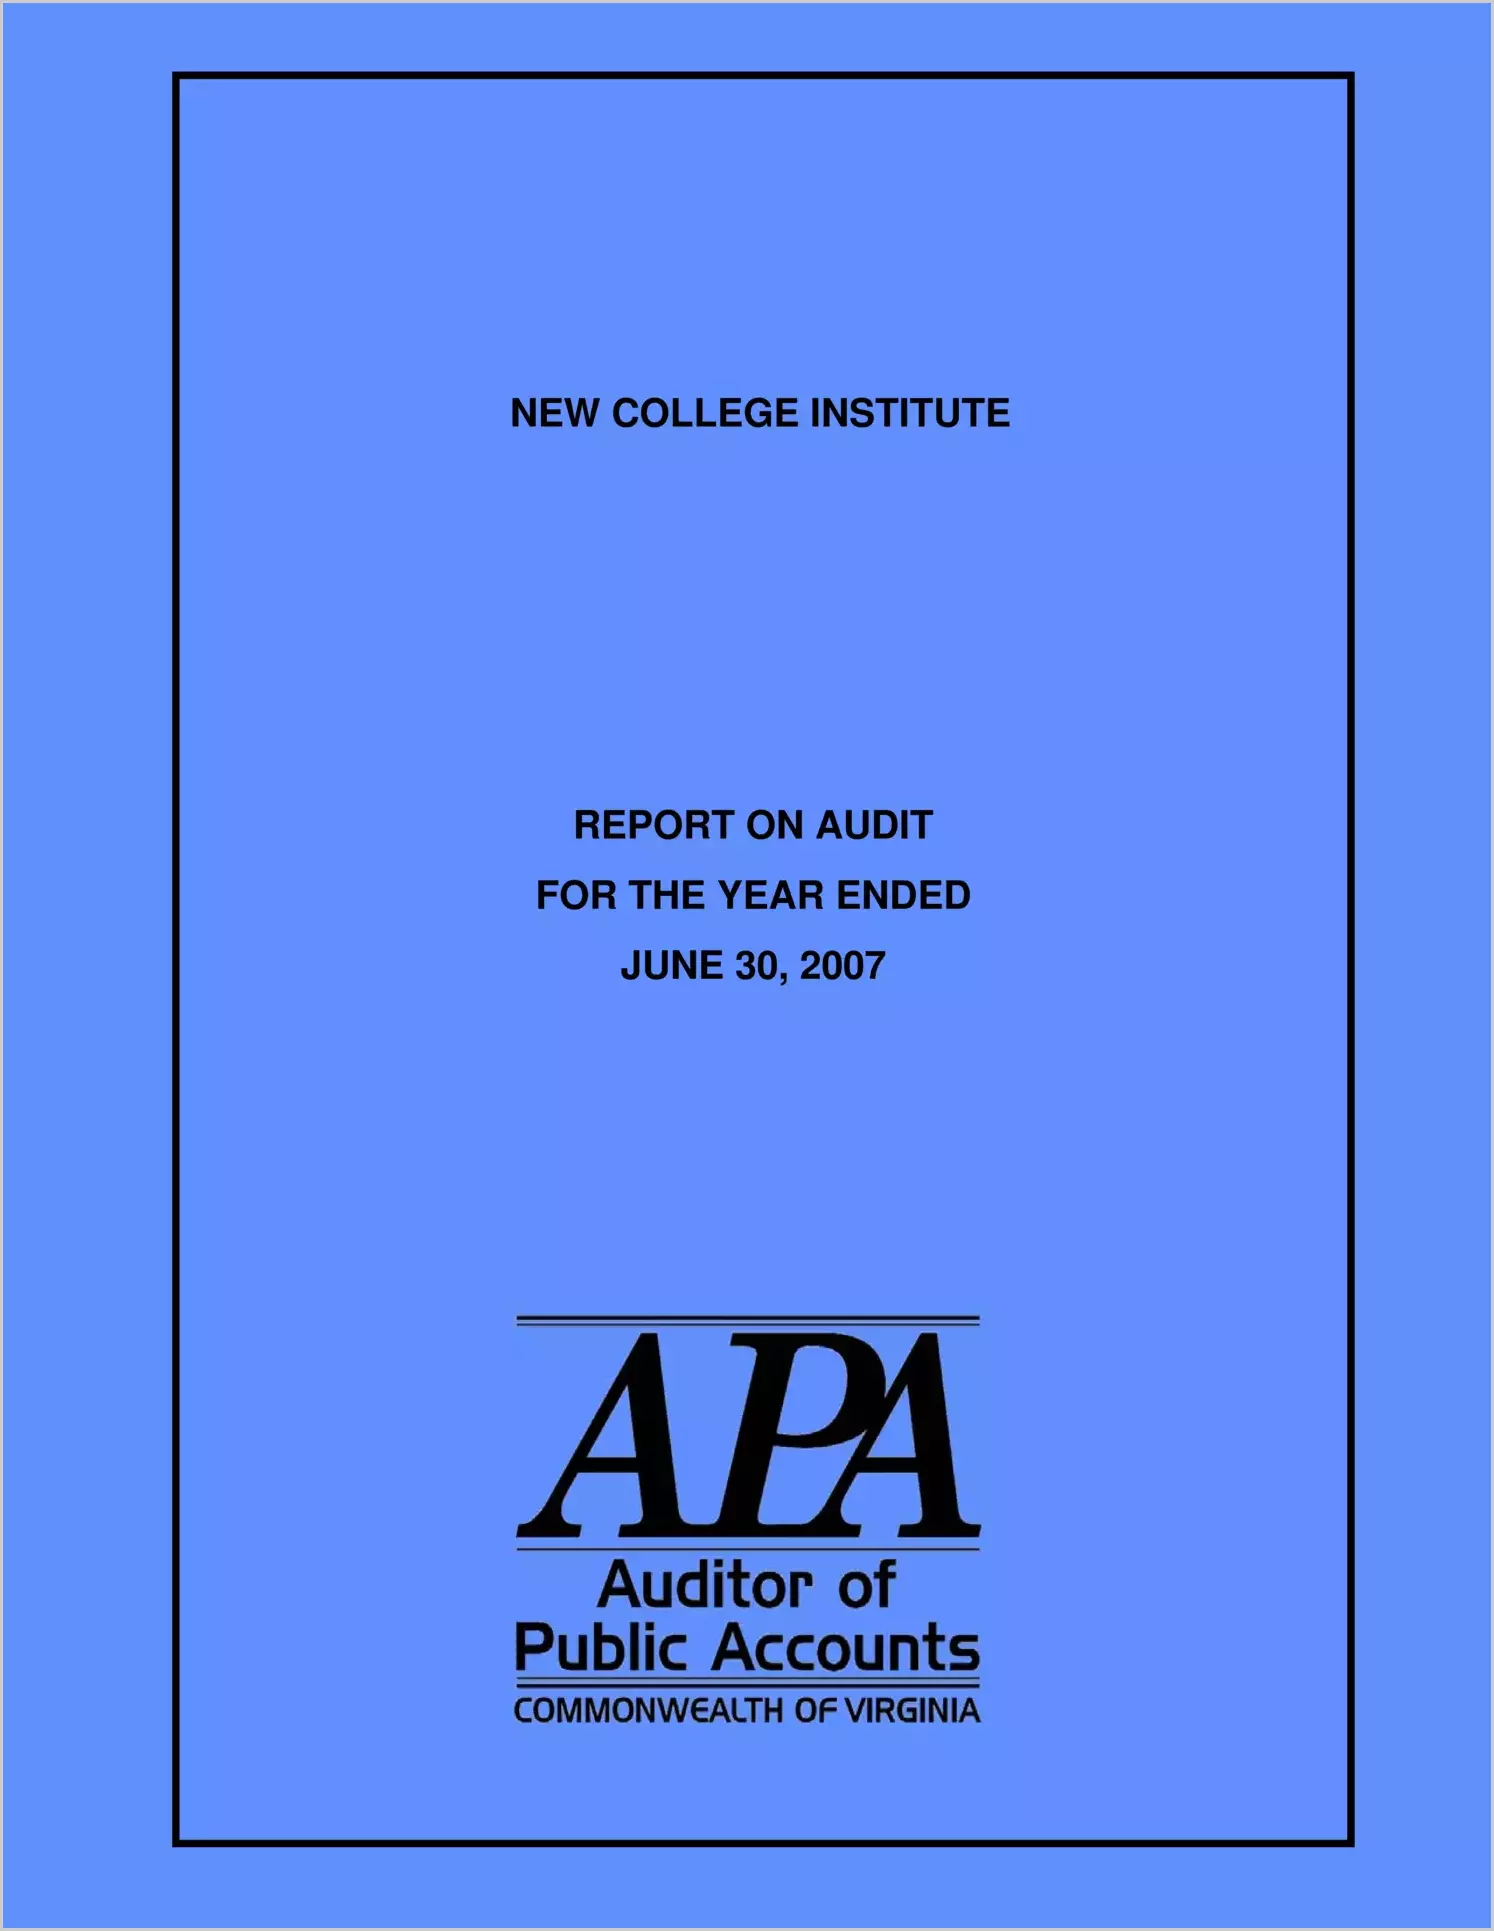 New College Institute Report on Audit for the year ended June 30, 2007